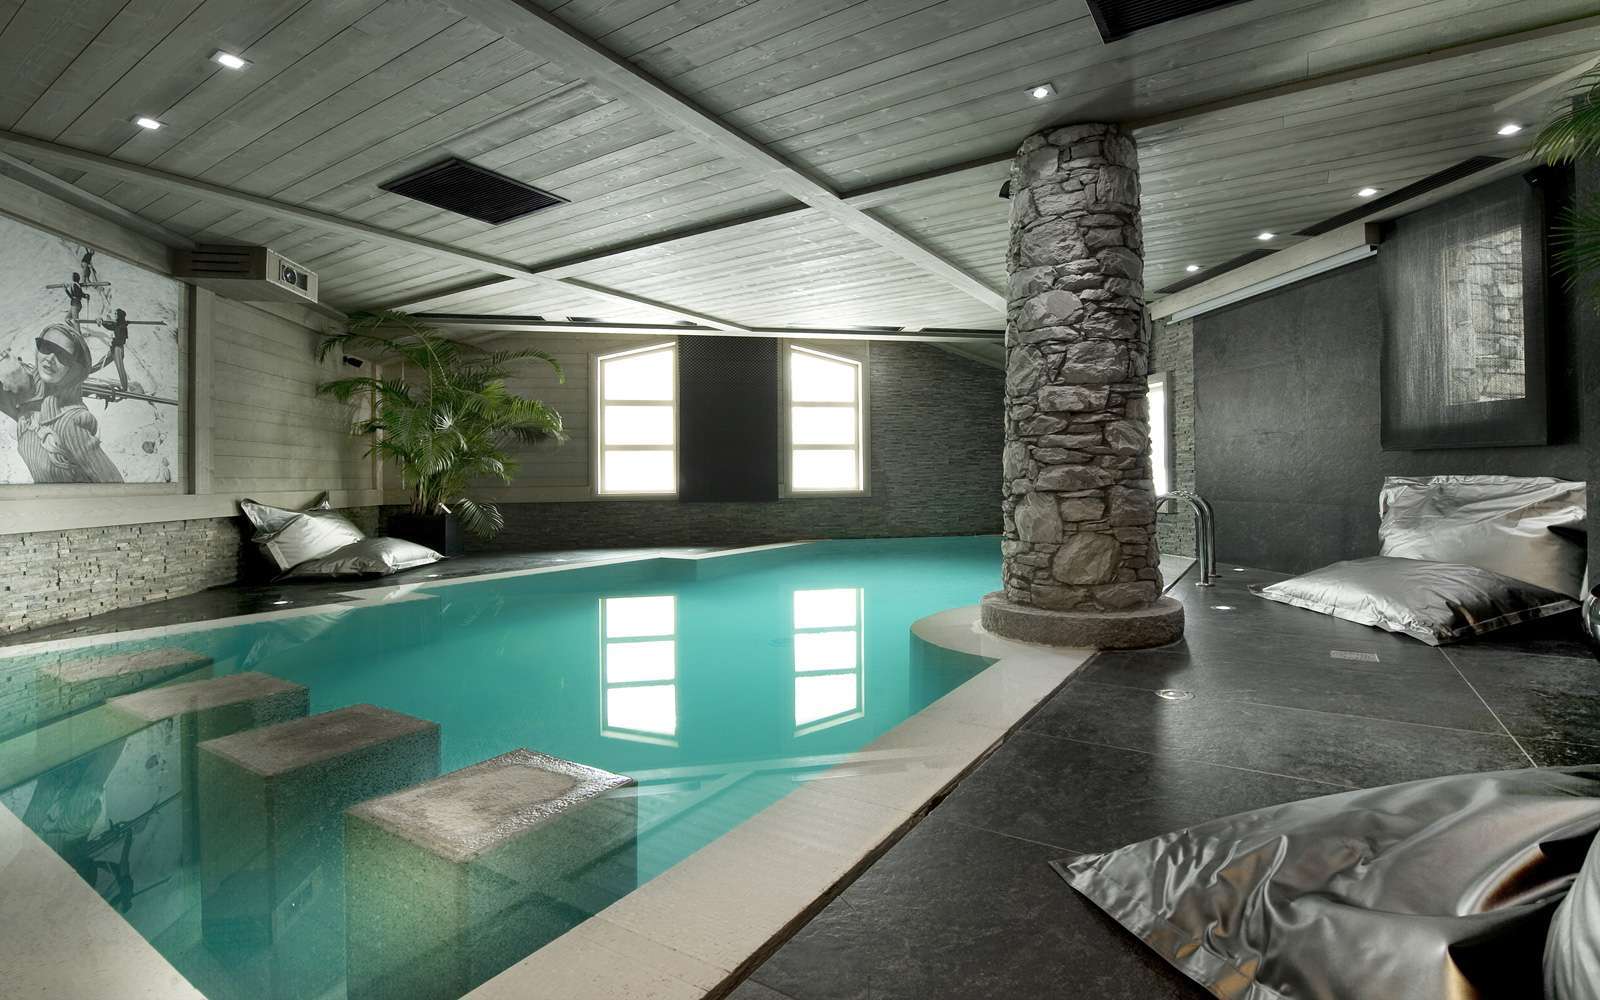 Kings-avenua-val-disere-snow-chalet-hammam-swimming-pool-childfriendly-parking-cinema-boot-heaters-fireplace-area-val-disere-007-3